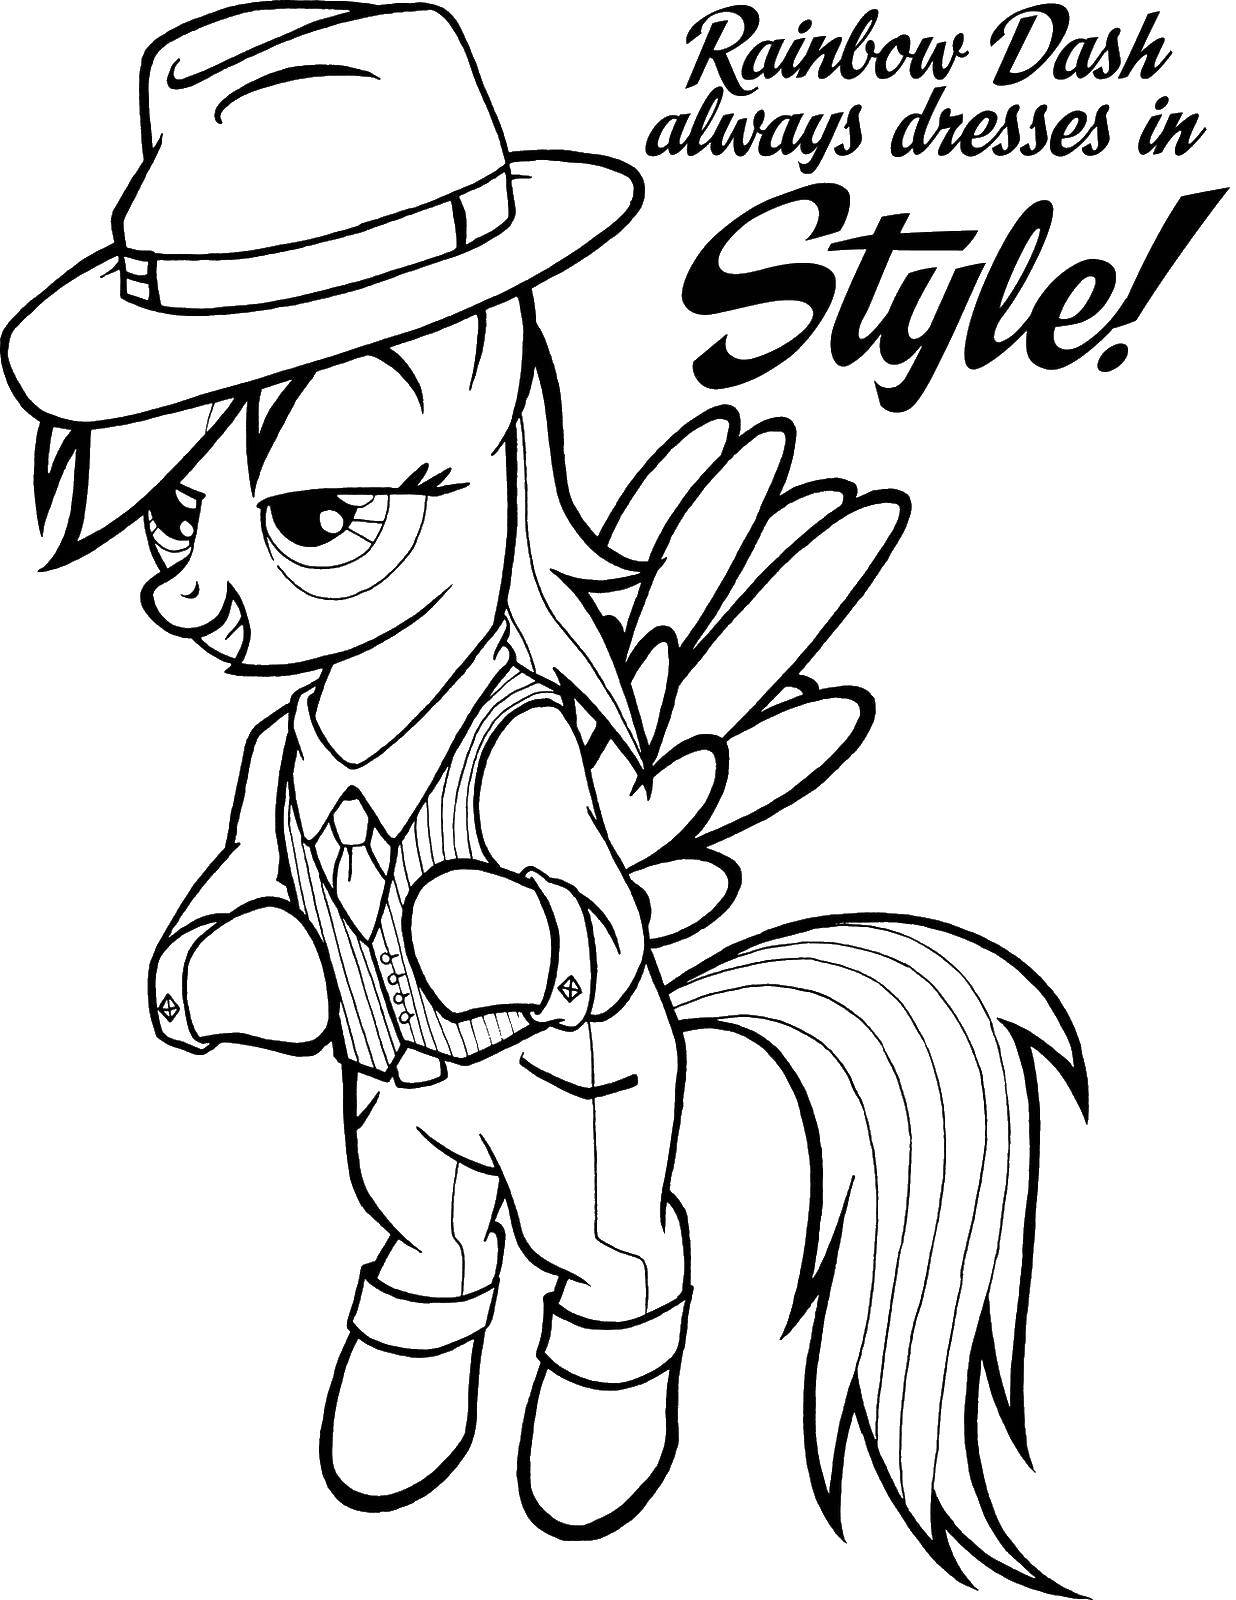 Coloring A pony in a suit. Category Ponies. Tags:  pony tale, girls.